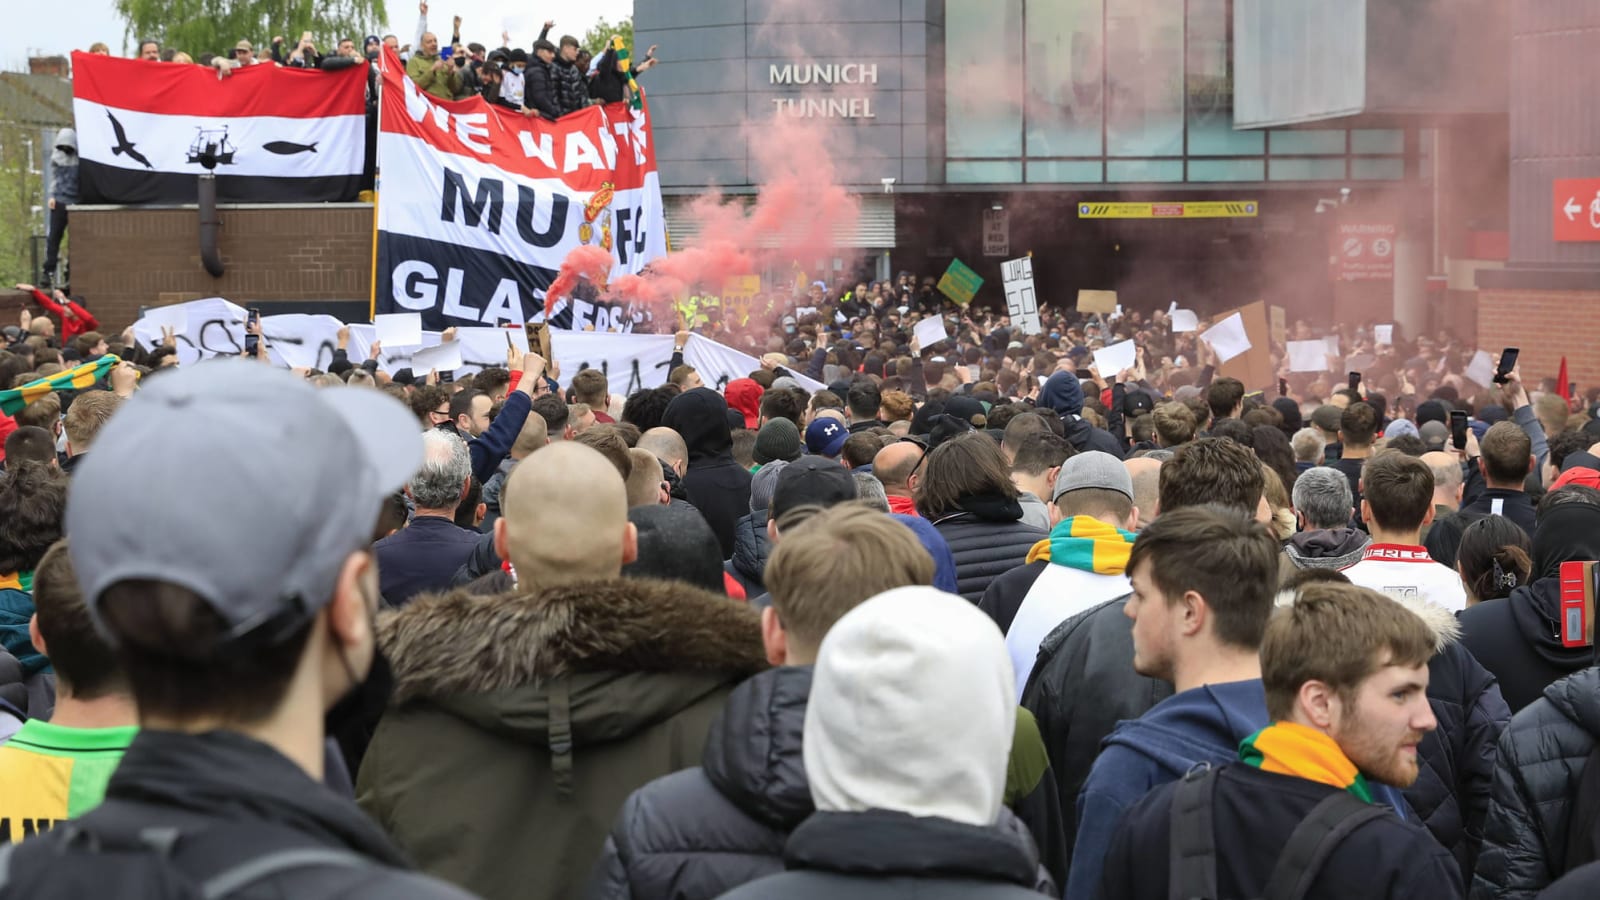 Man United fans storm Old Trafford to protest owners